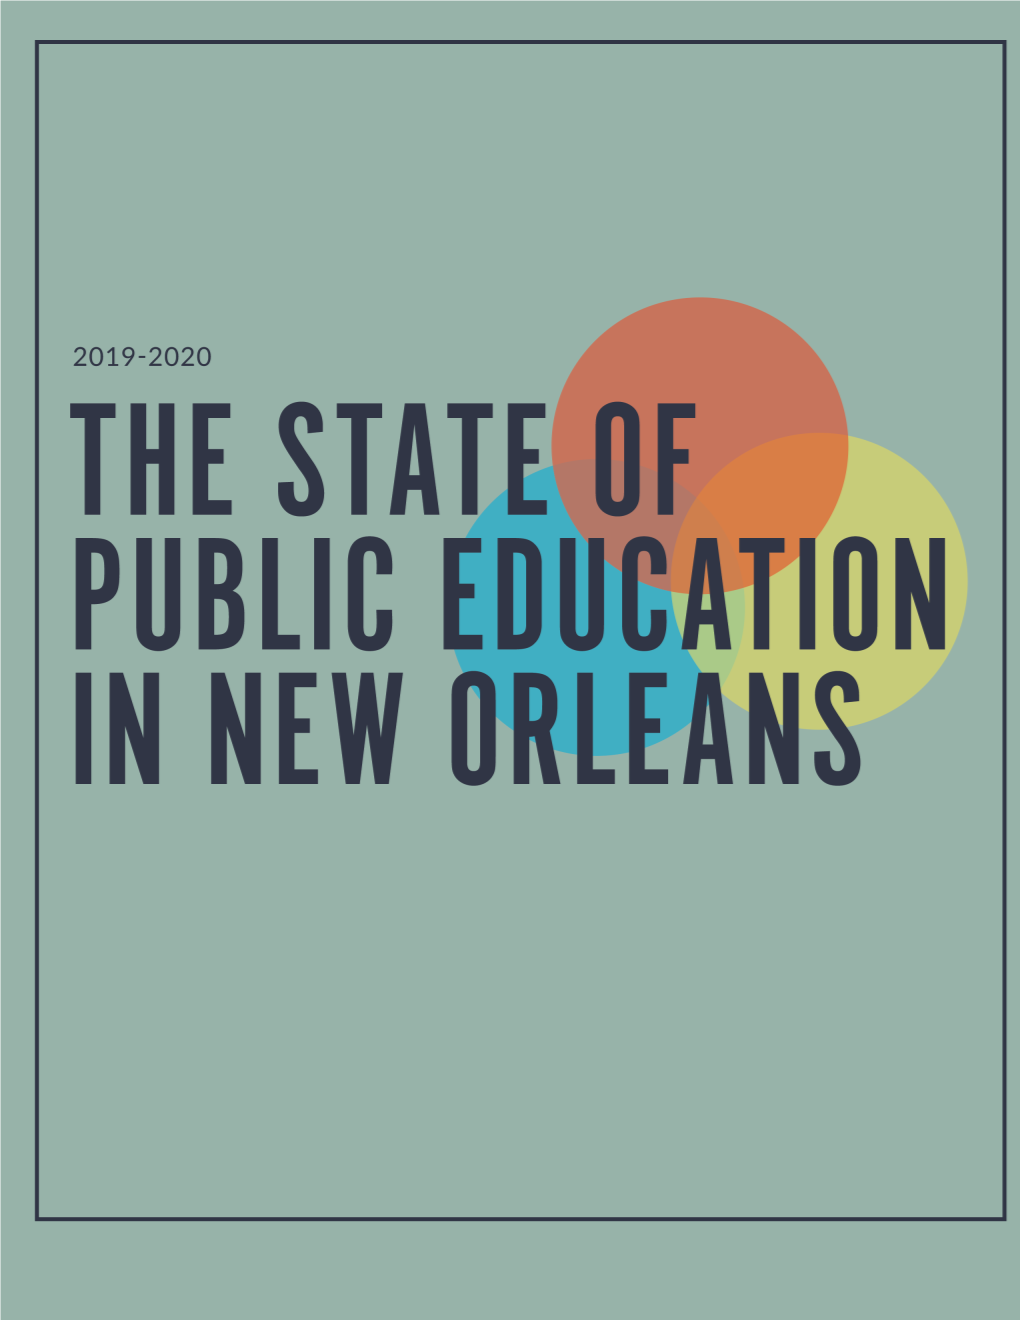 The State of Public Education in New Orleans, 2019-2020